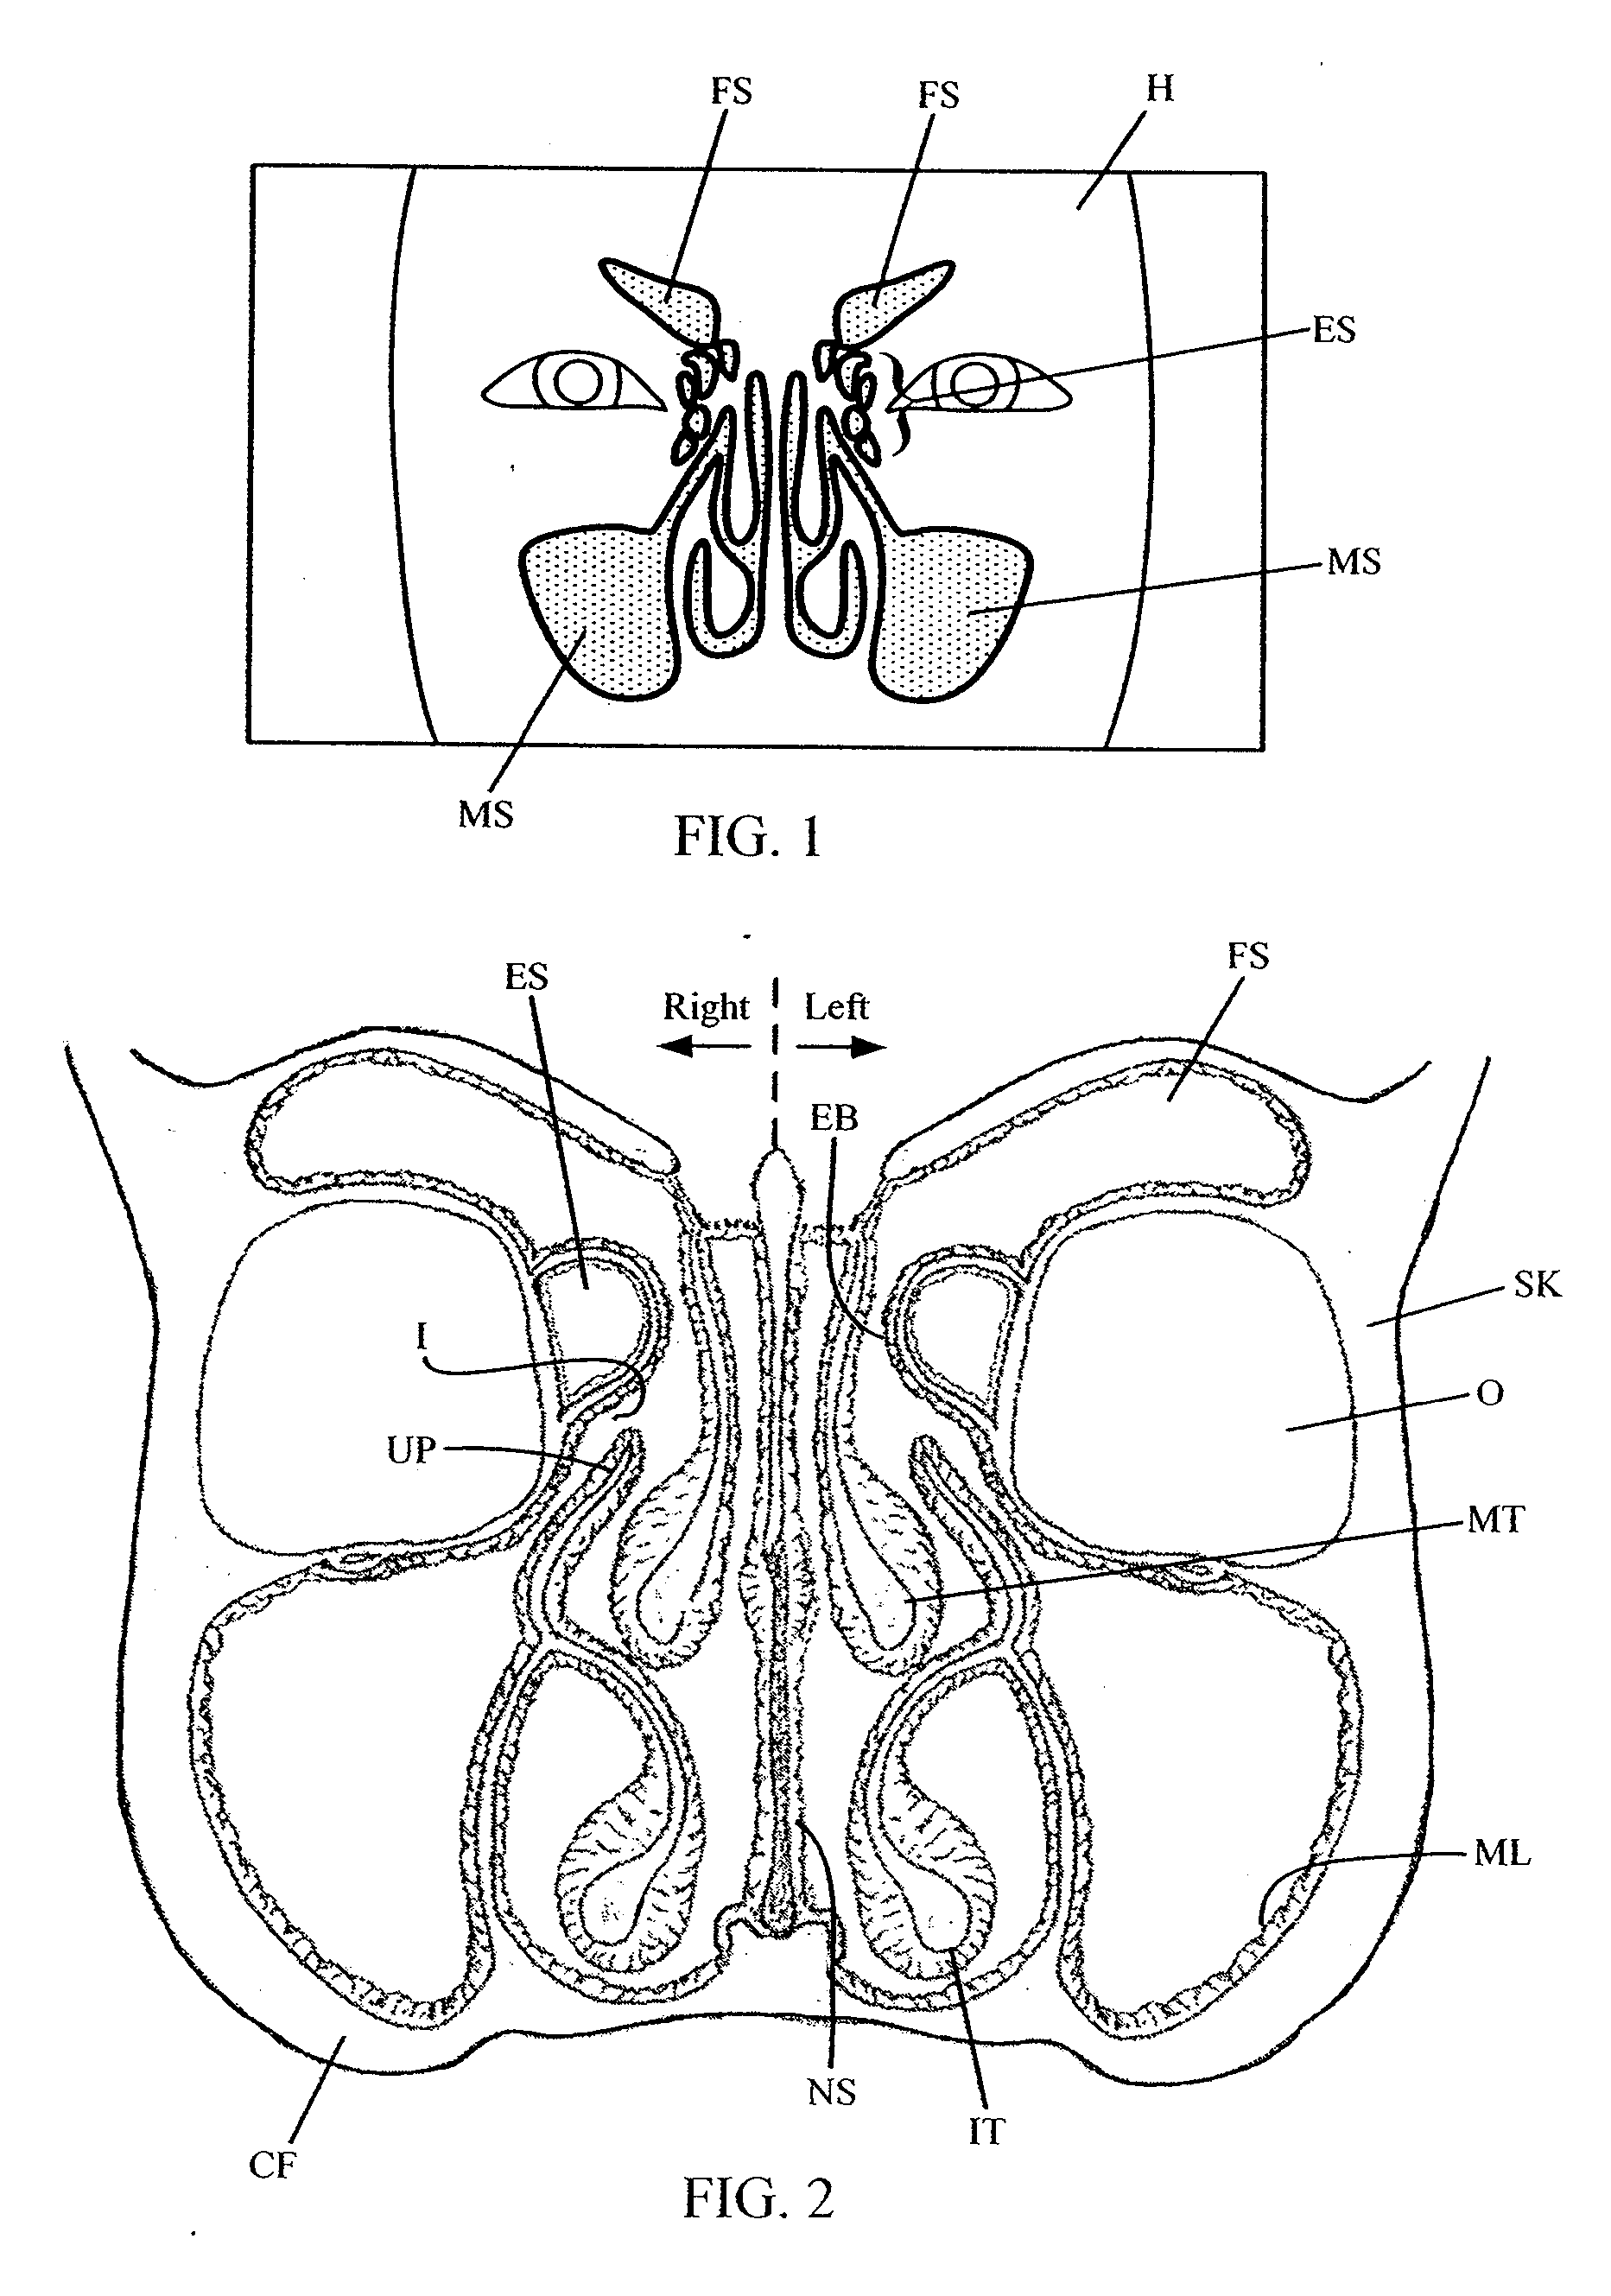 Method for accessing a sinus cavity and related anatomical features